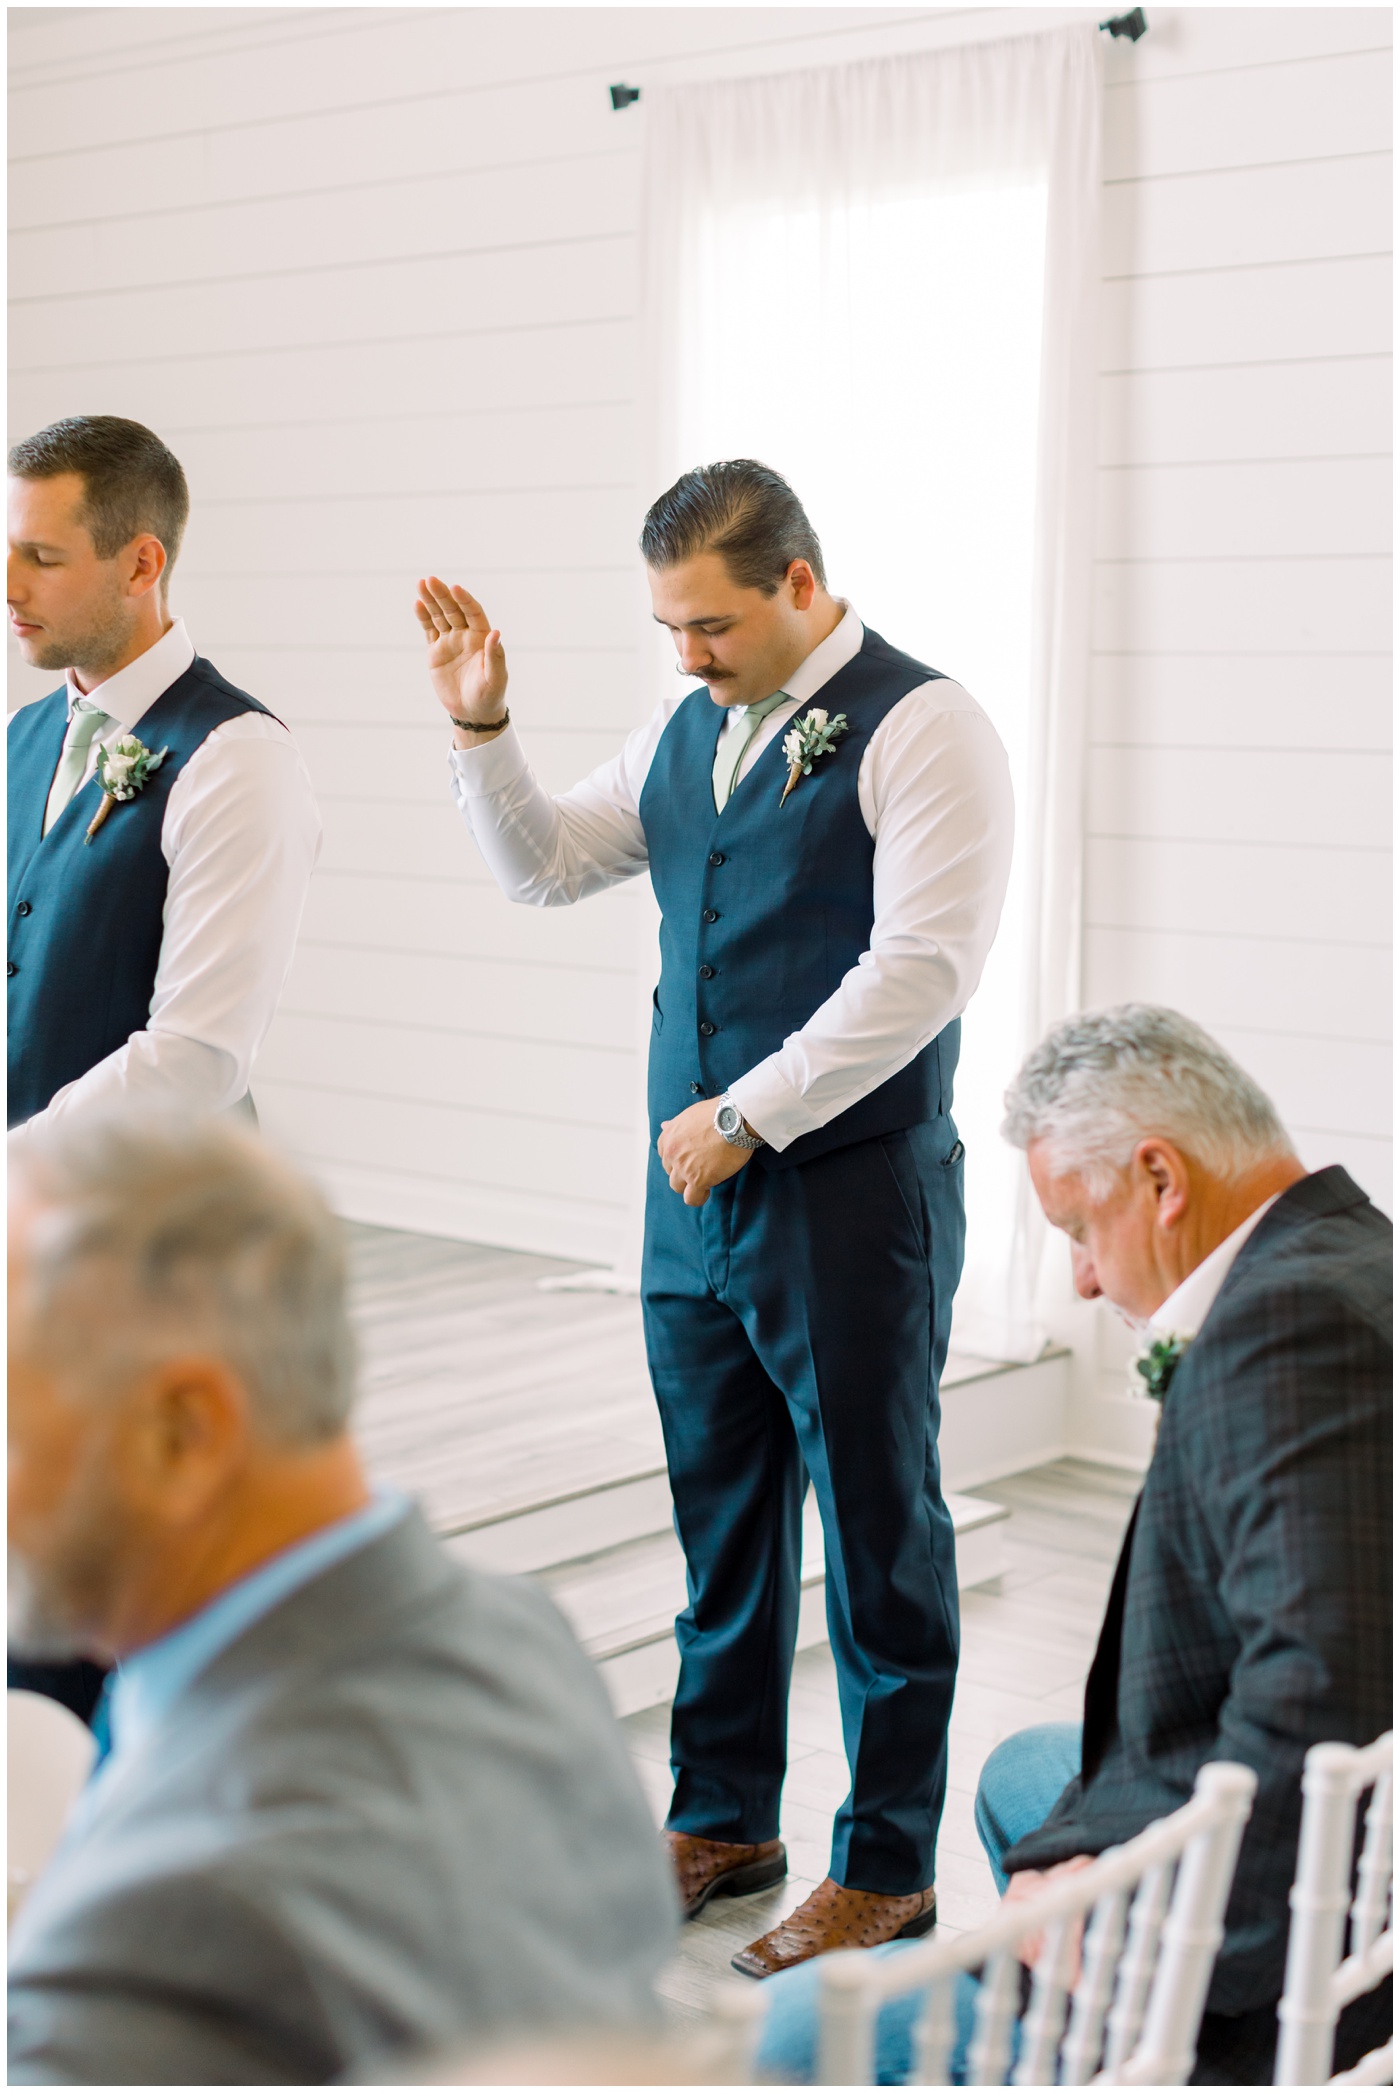 a groomsmen lifts his hand in prayer during the wedding ceremony